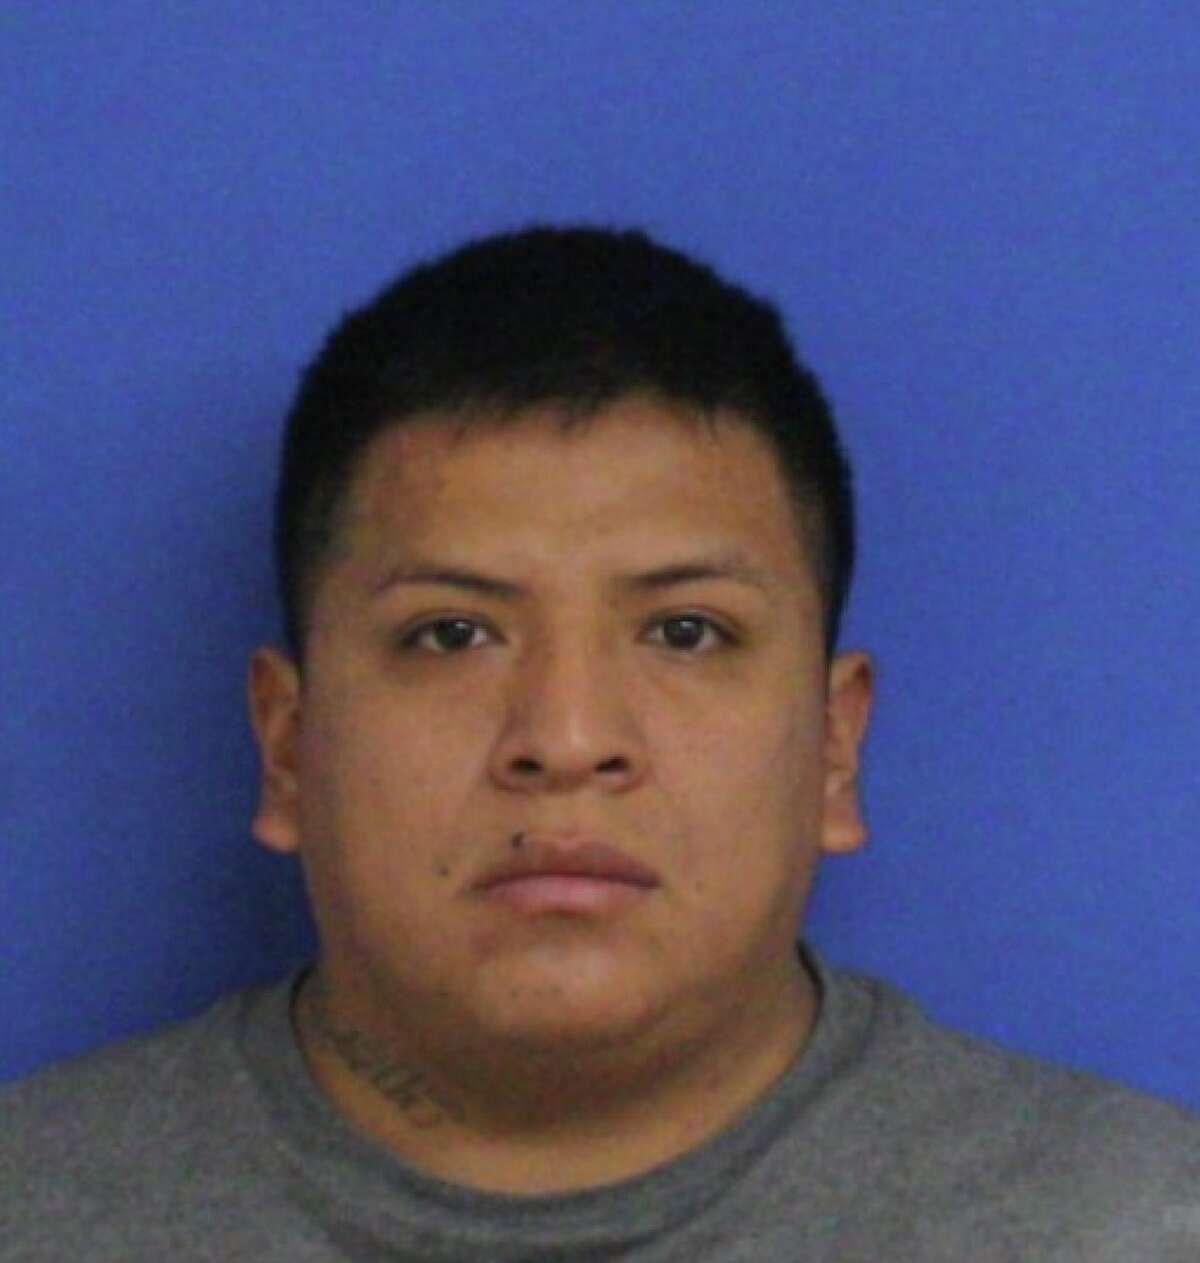 Mug shot of Jonnathan Jara-Aucapina who was arrested in connection with the murder of Lizzbeth Aleman-Popoca.